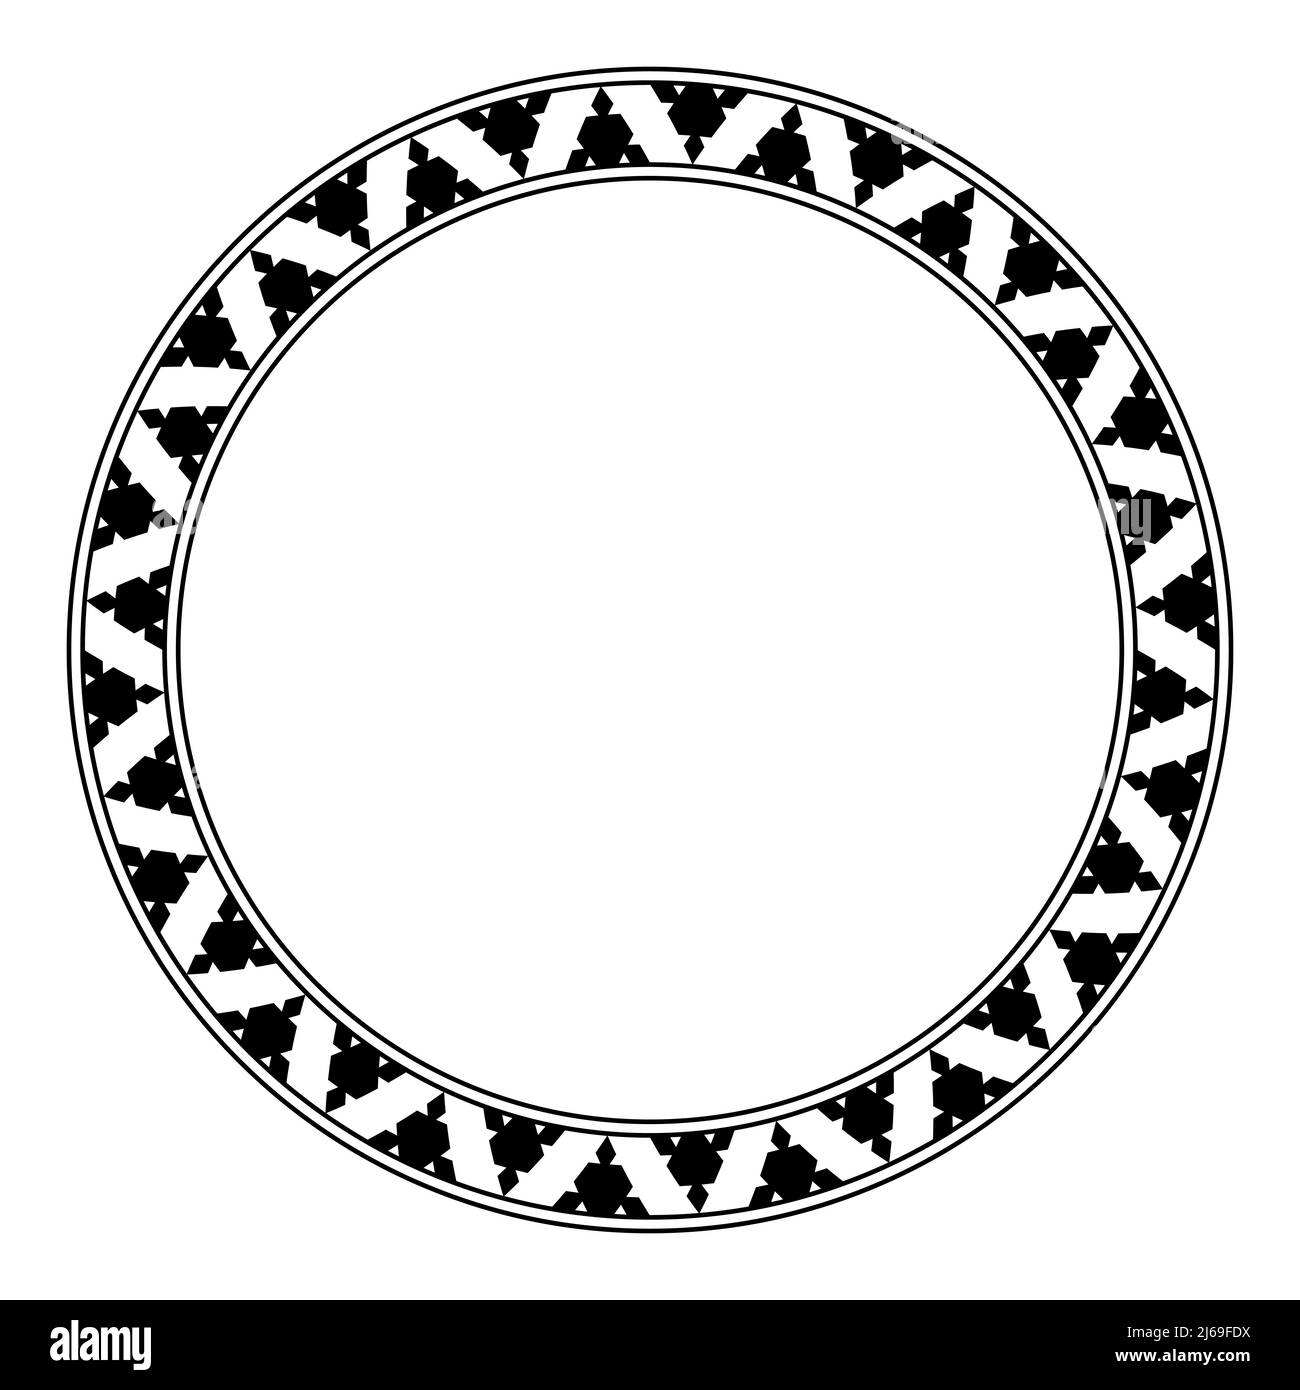 Toothed triangle pattern in a circle frame. Black triangles, arranged alternately, with cut out areas, produce a serrated pattern. Stock Photo